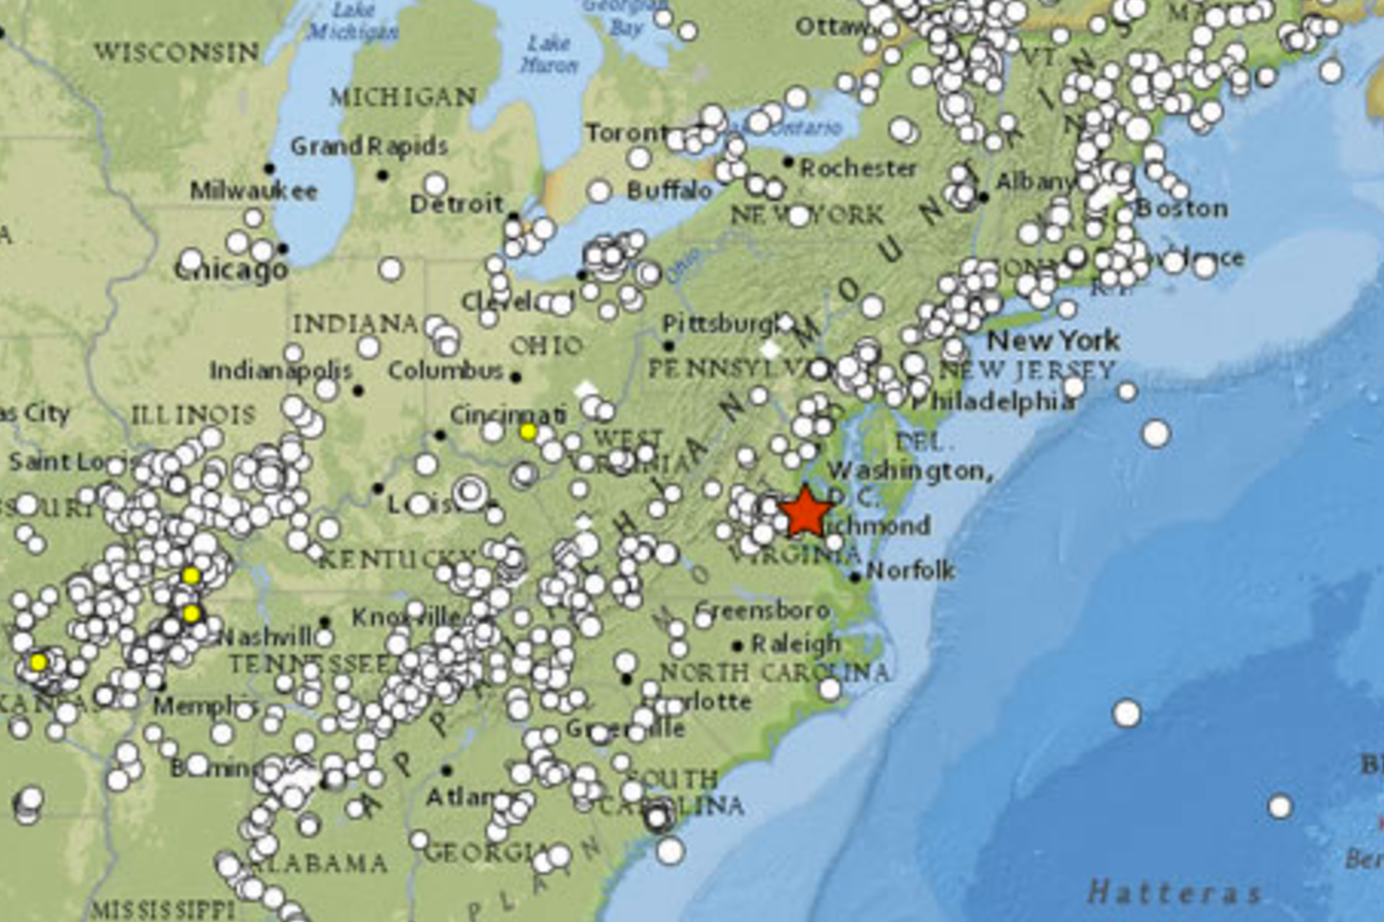  A red star denotes the location of the August 23, 2001 earthquake, and the dots represent the locations where people reported feeling the tremor to the United States Geological Survey. (Image: USGS) 